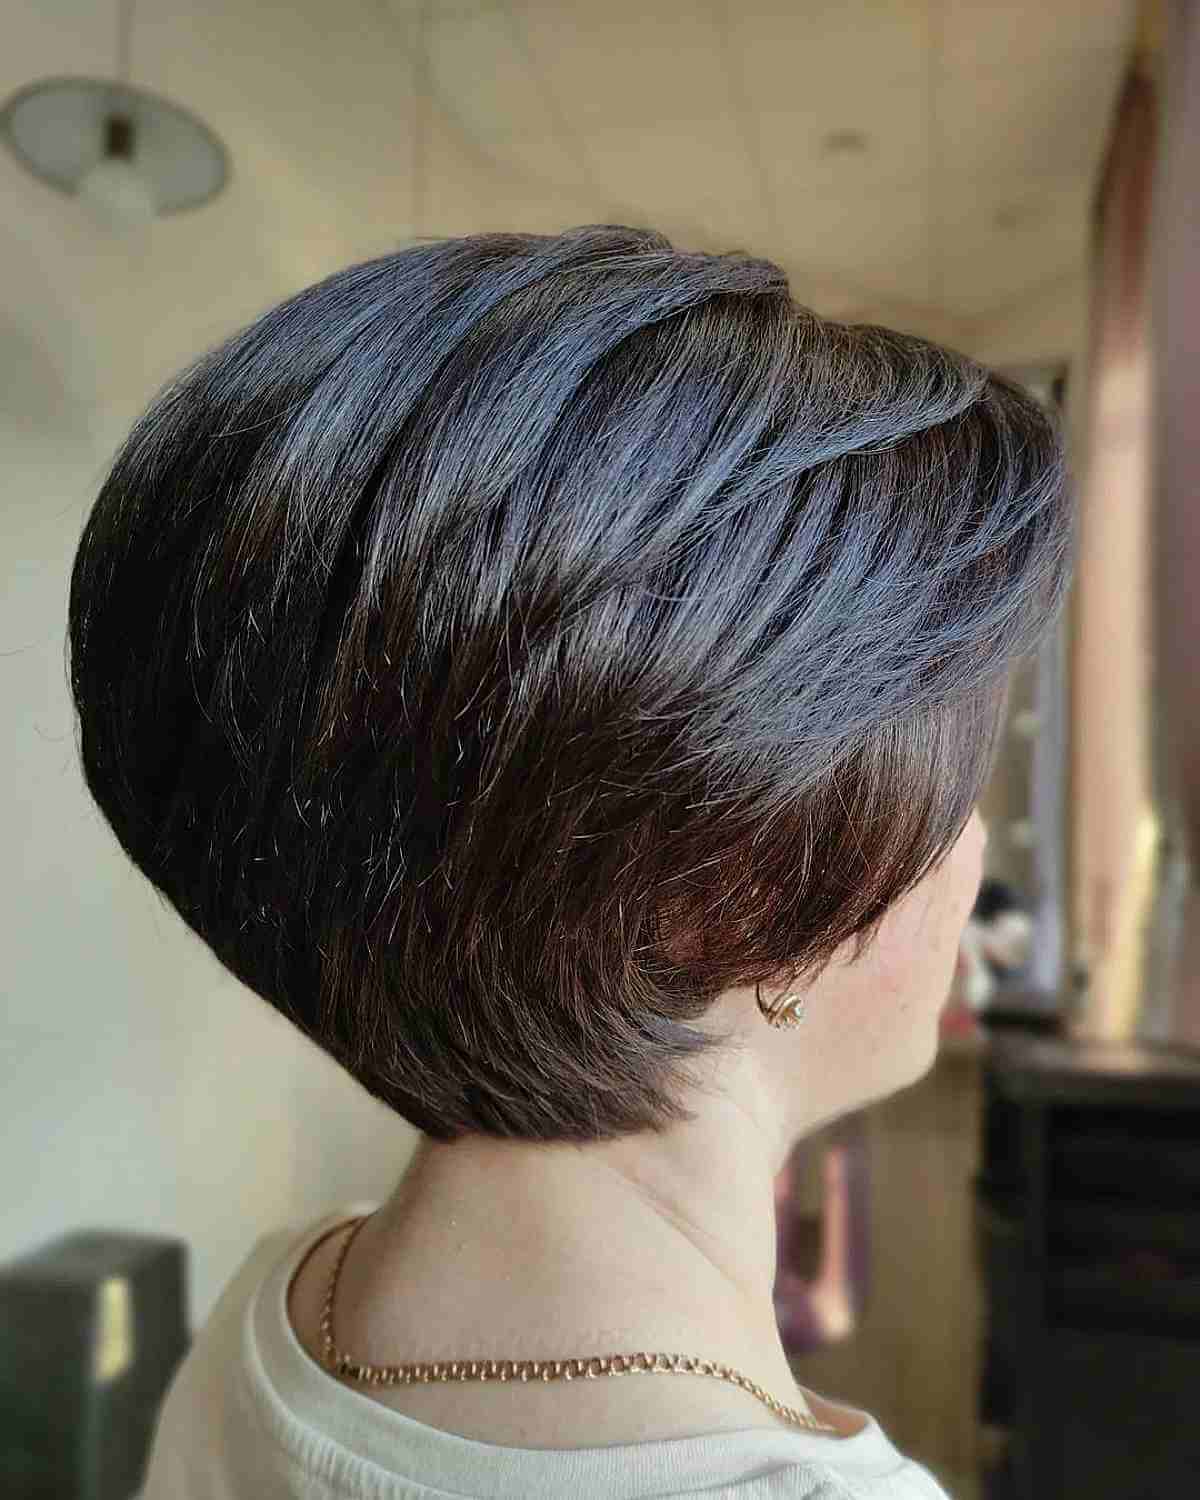 Pixie Bob for Thick Hair